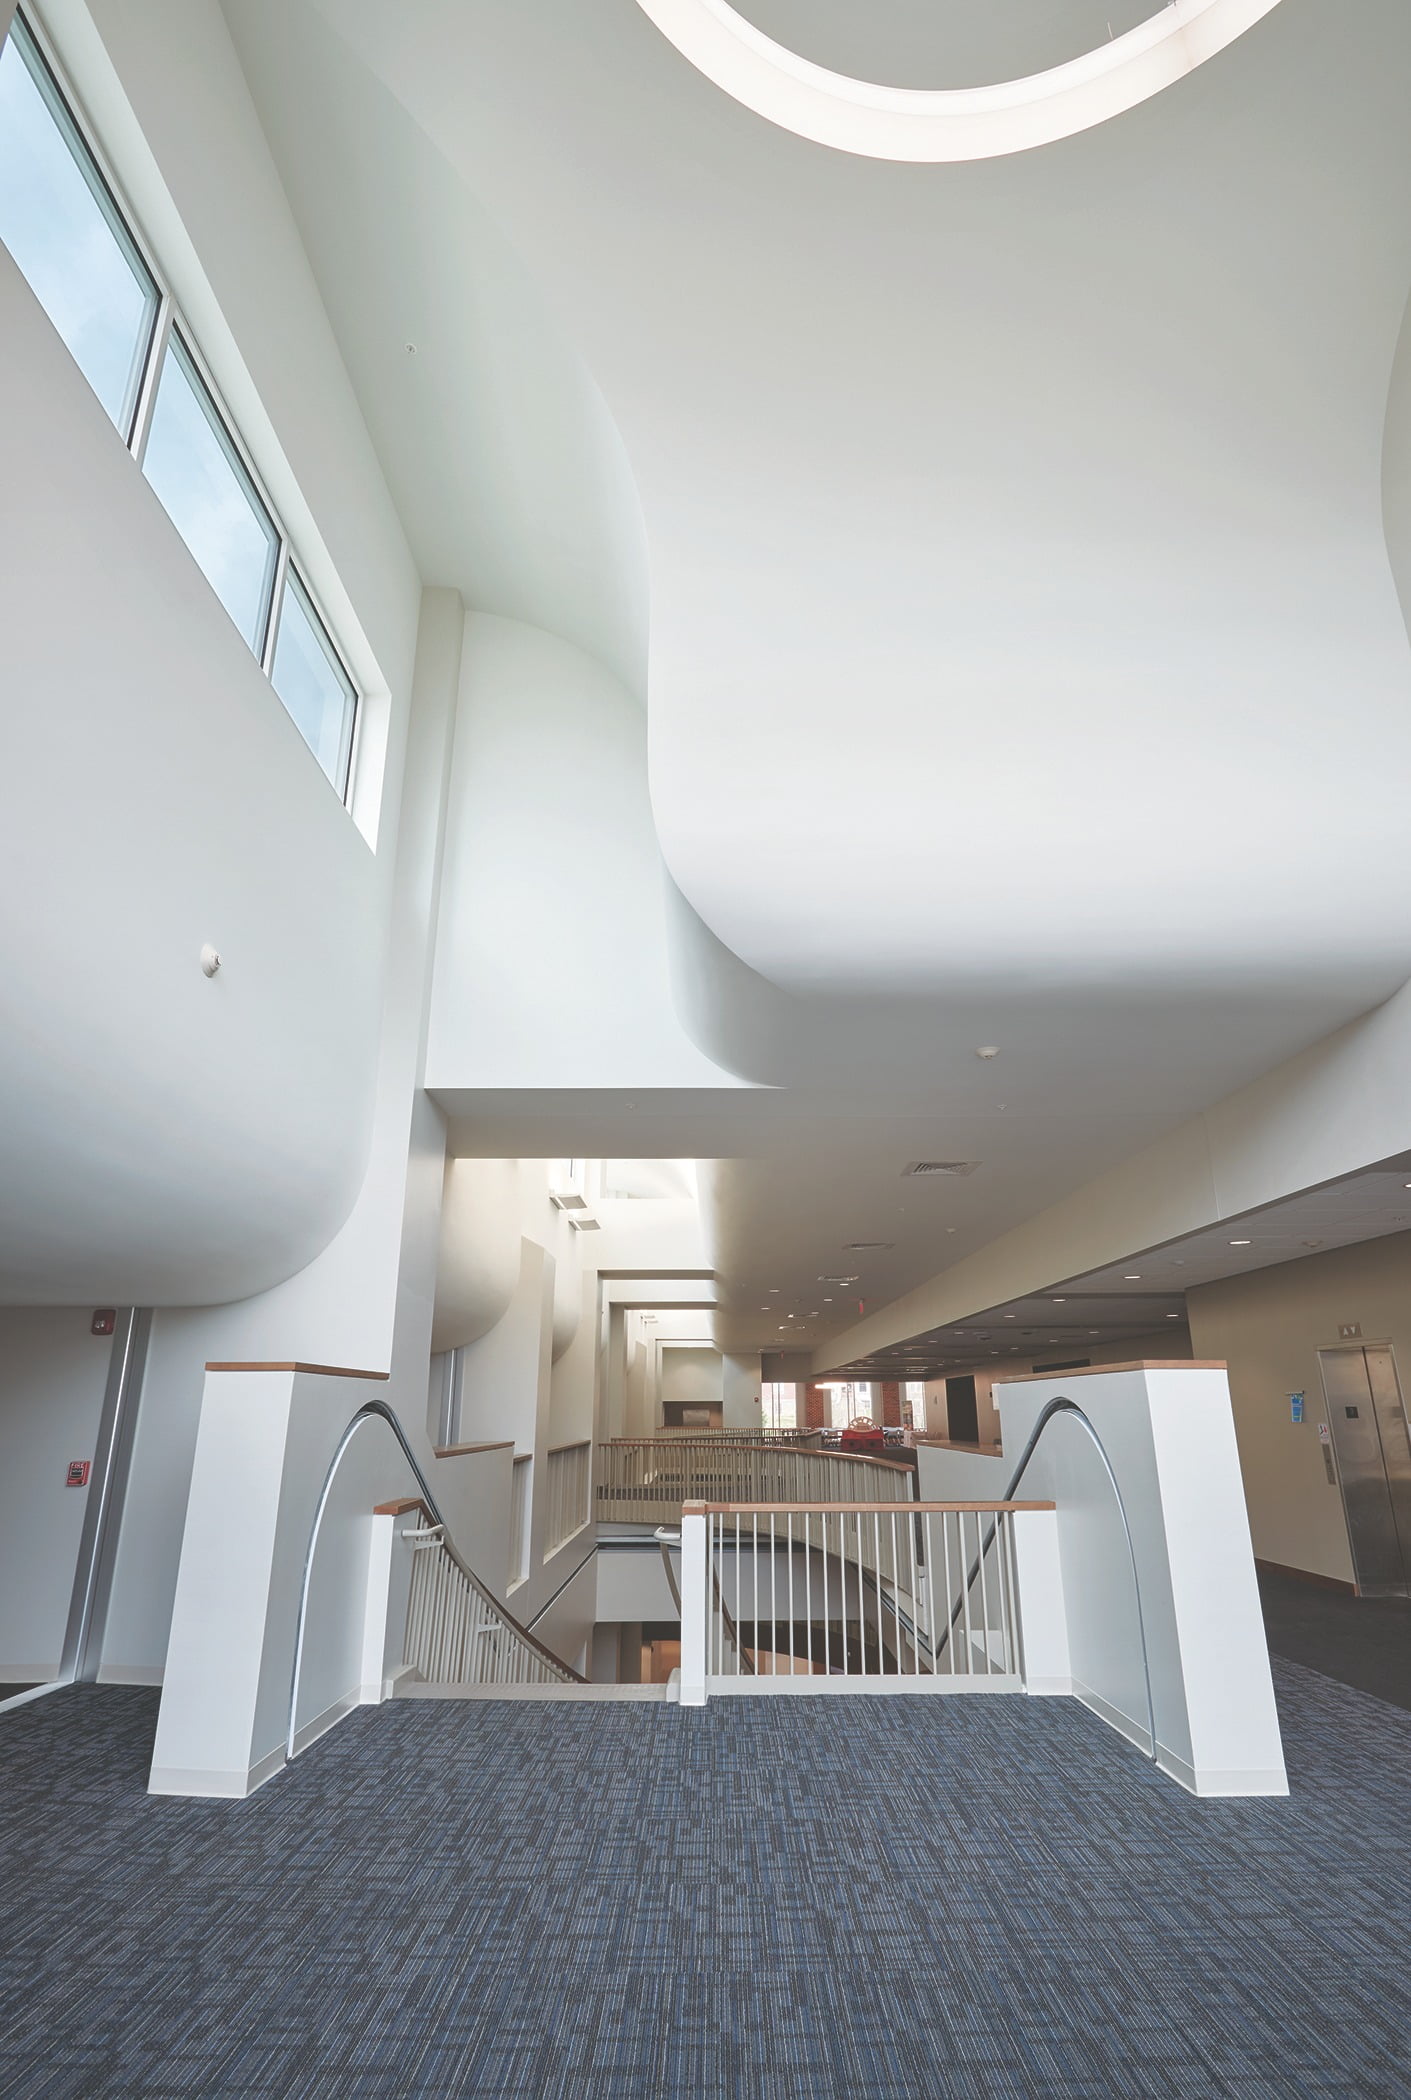 Drywall Grid System Helps Shape Design of Light Well